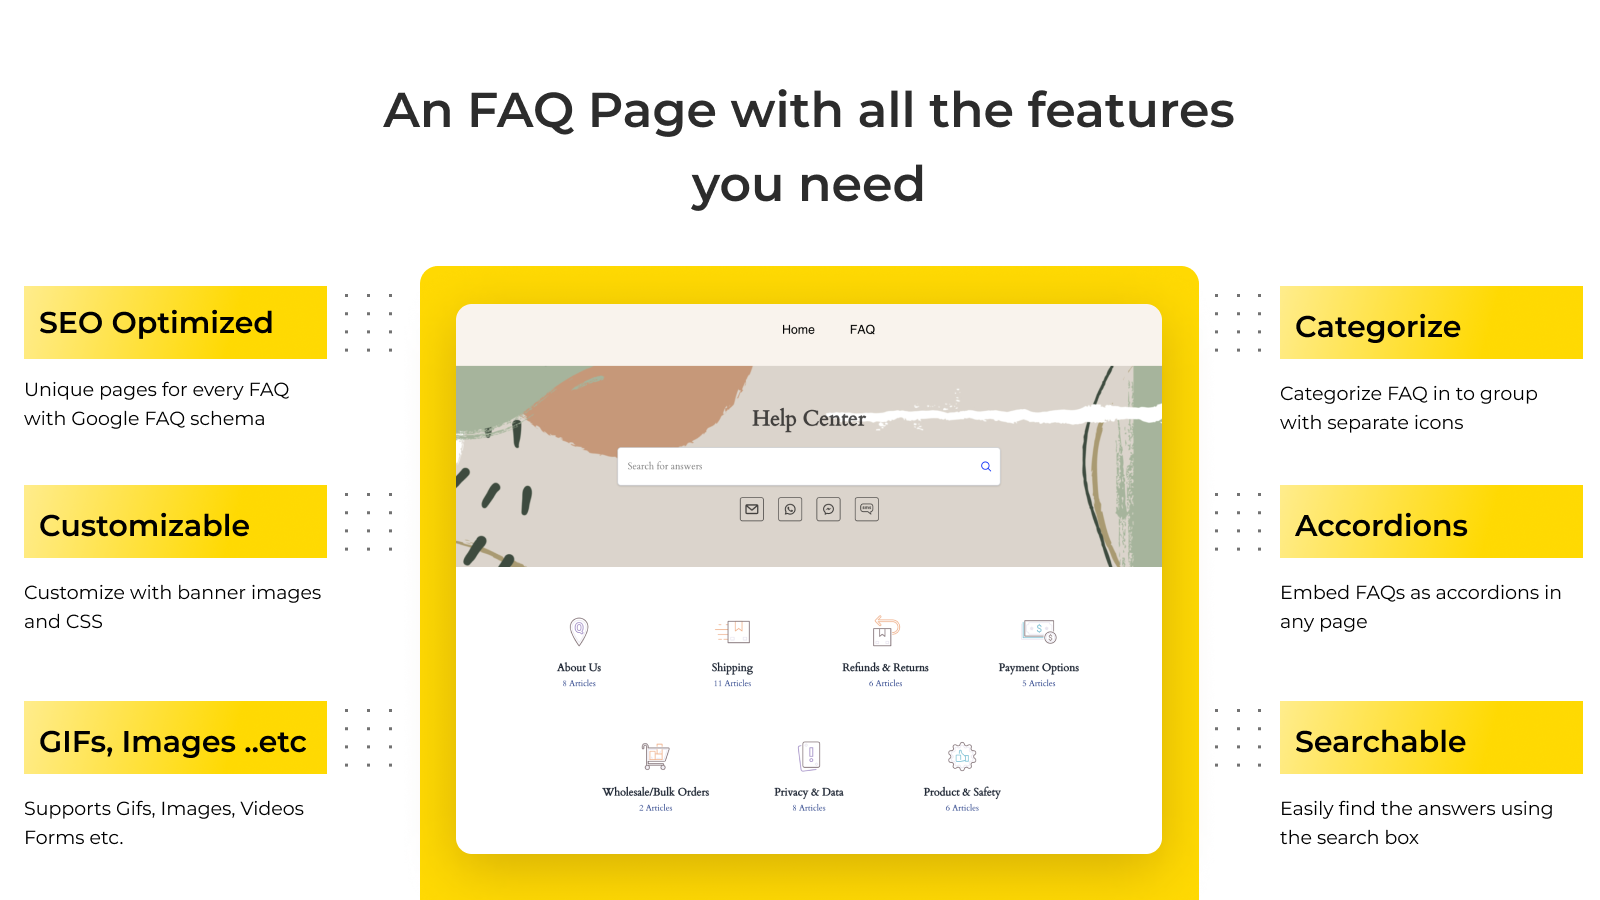 Professional FAQ page in help center or accordion style